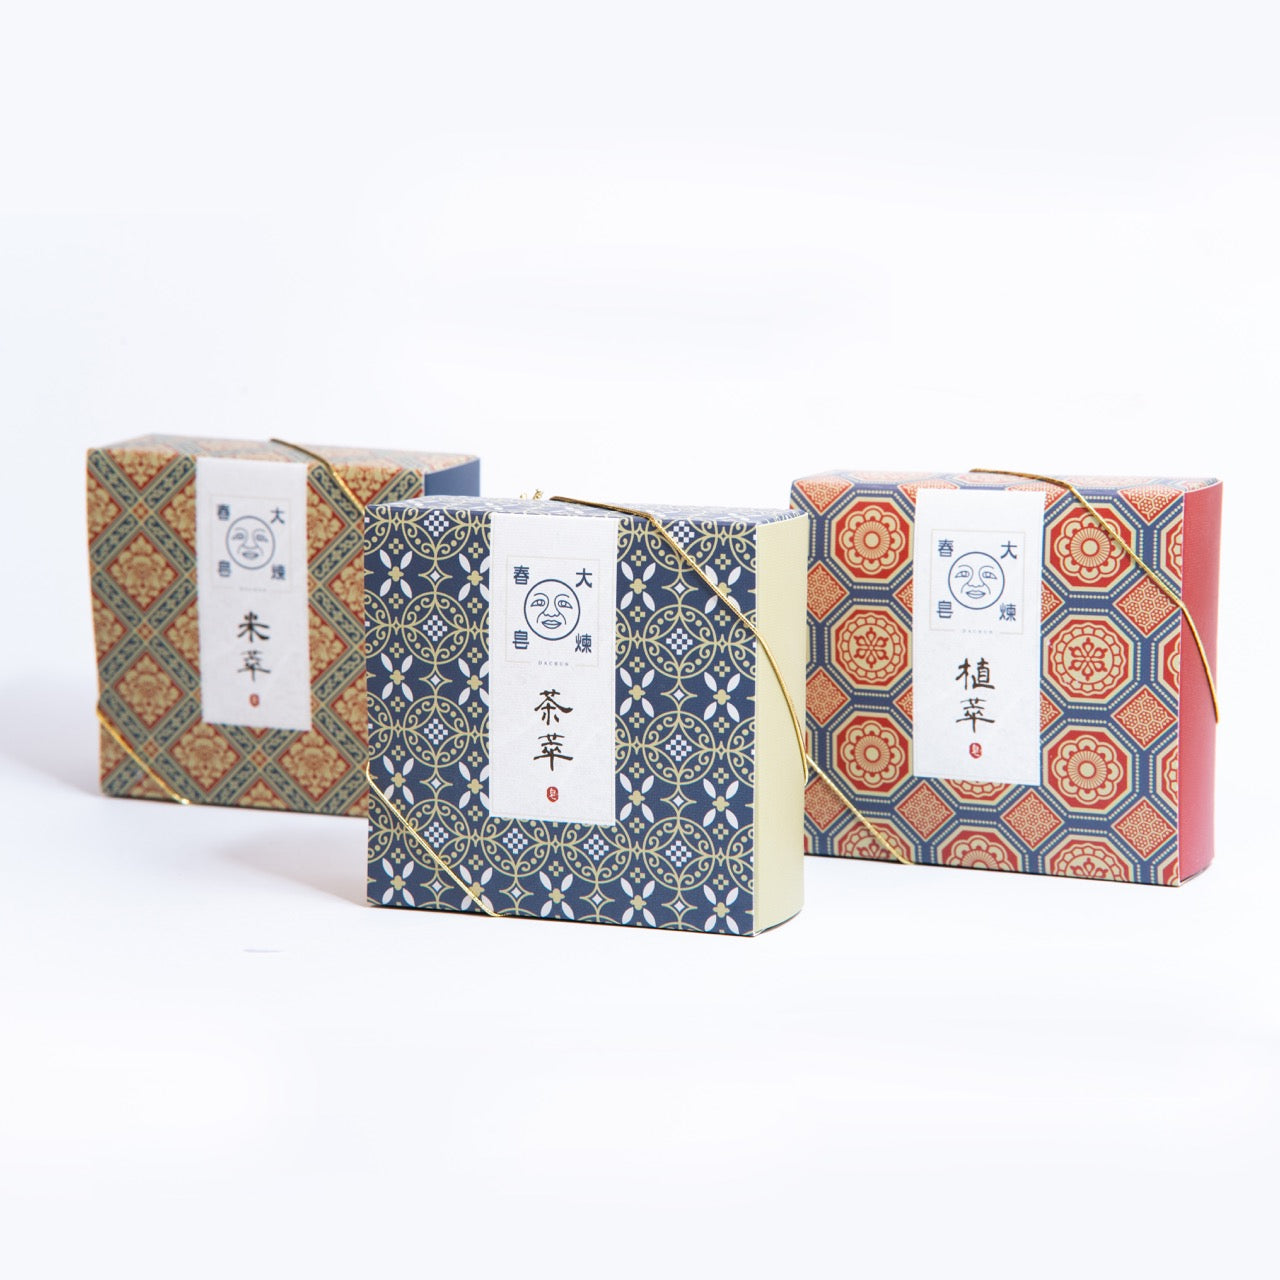 Dachun Soap - Classic Rice Body and Hand Soap